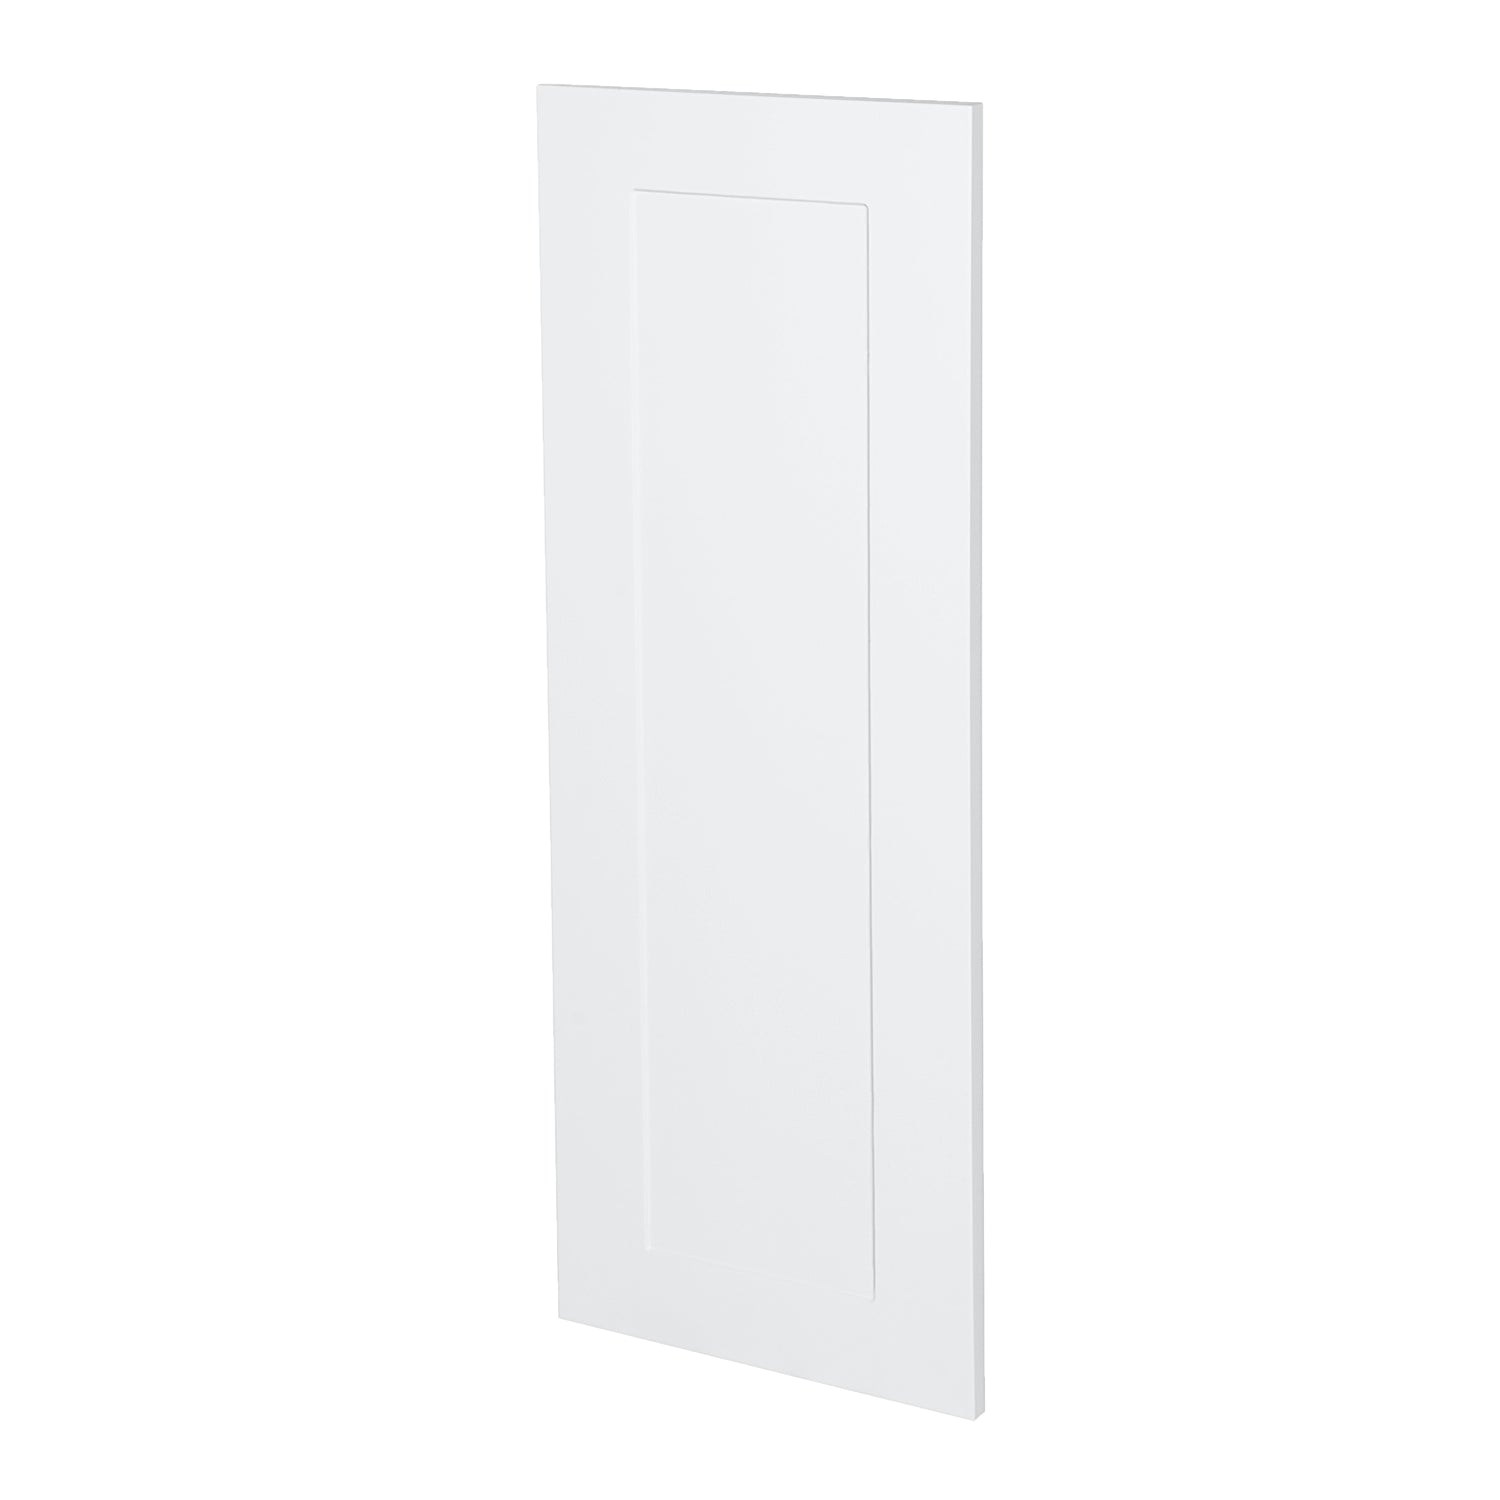 White Shaker Style Kitchen Cabinet End Panel (12 in W x 0.75 in D x 36 in H) -  Pro-Edge HD